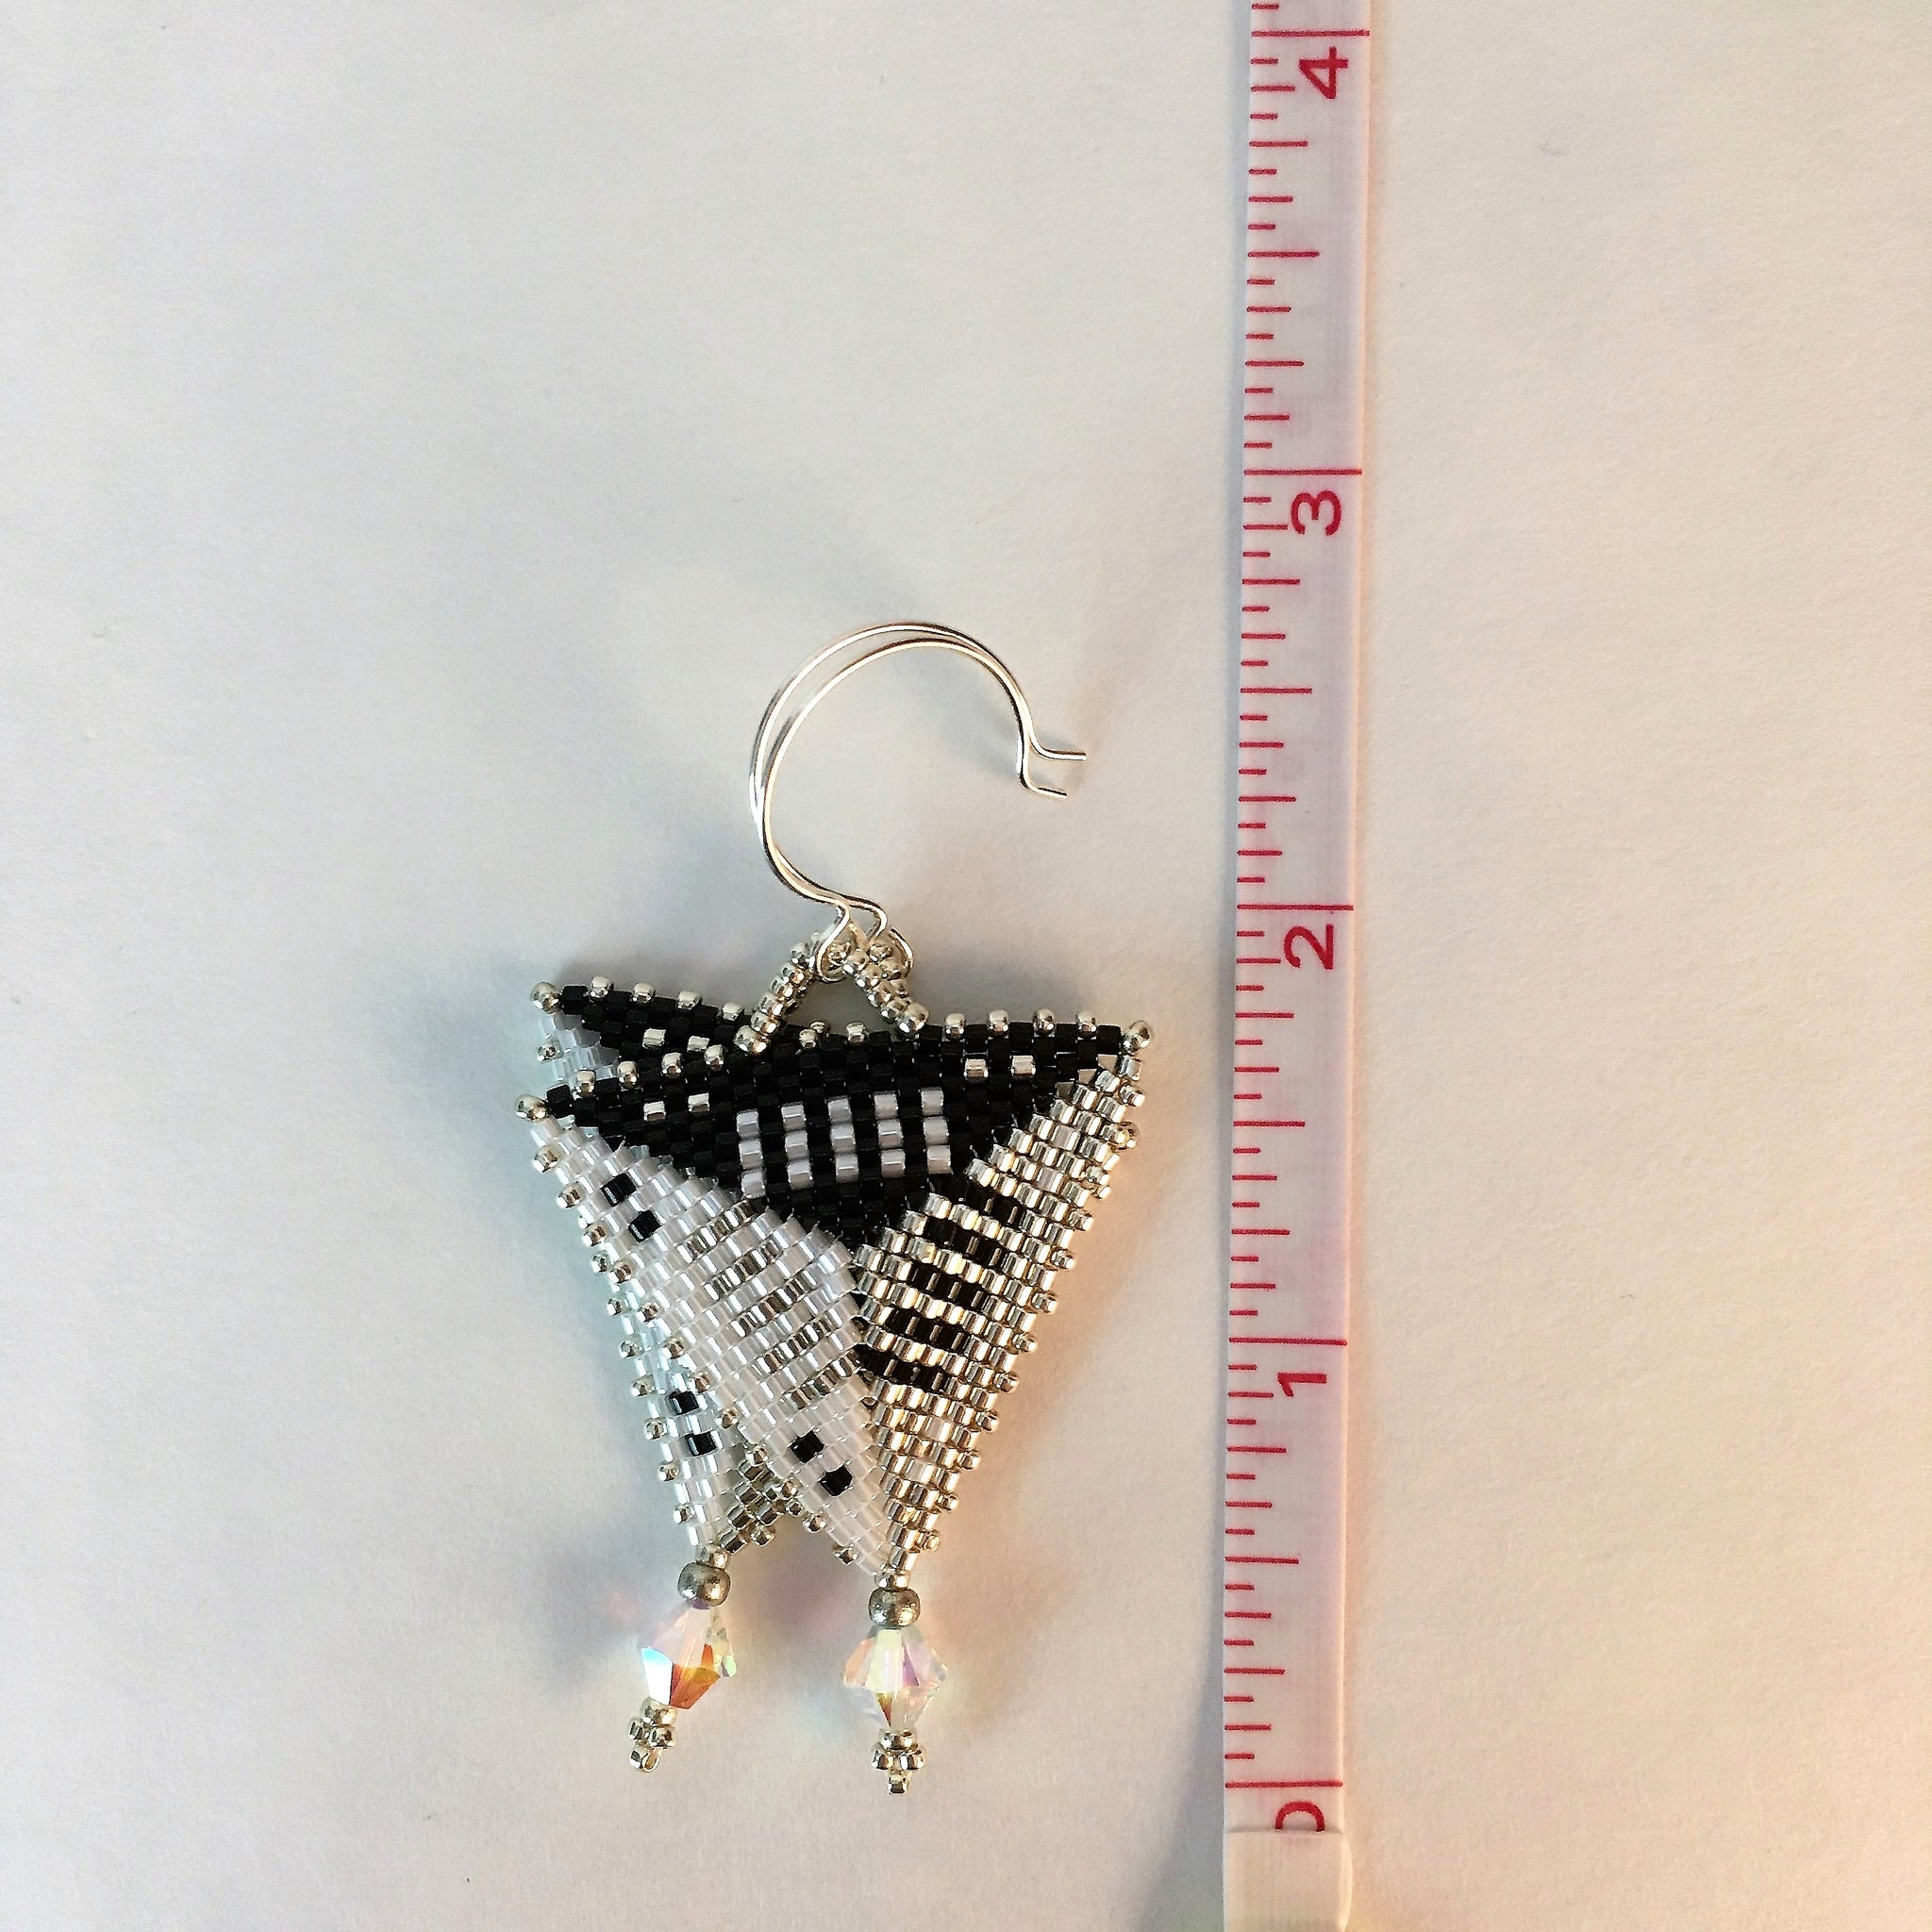 Contemporary Triangle Earrings in Black White and Silver with Swarovski™ Crystals